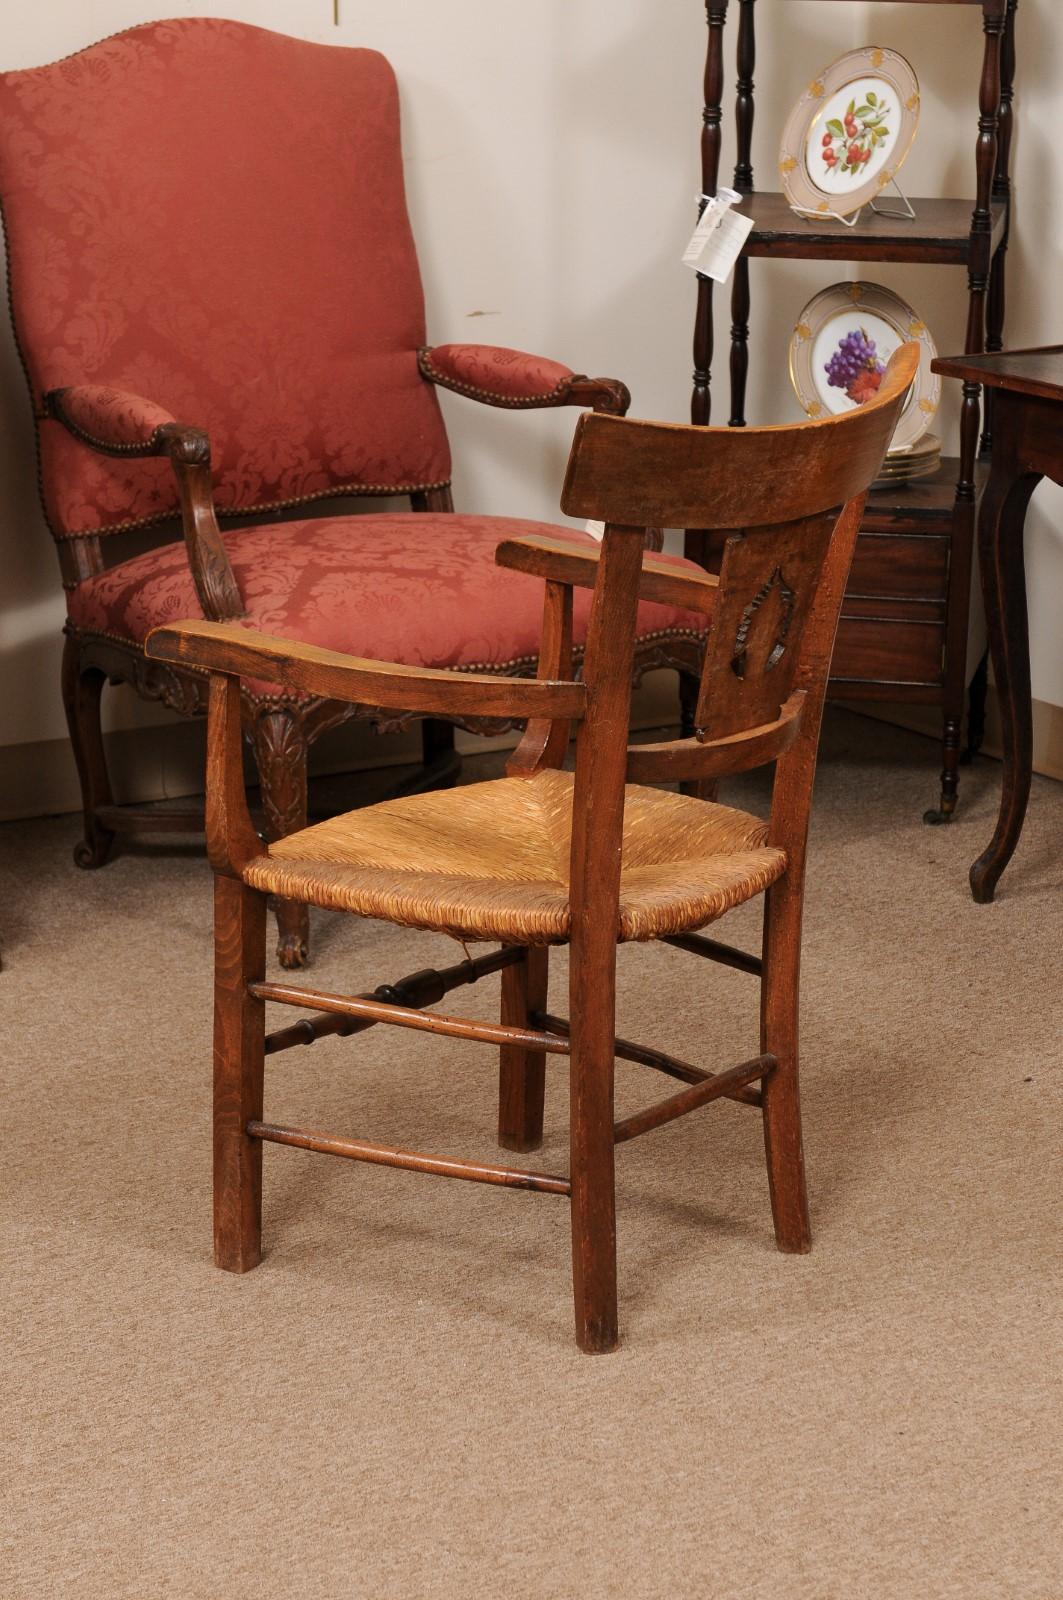 Fruitwood Rush Seat Armchair with Flower Basket Backsplat, Italy ca. 1850 In Good Condition For Sale In Atlanta, GA